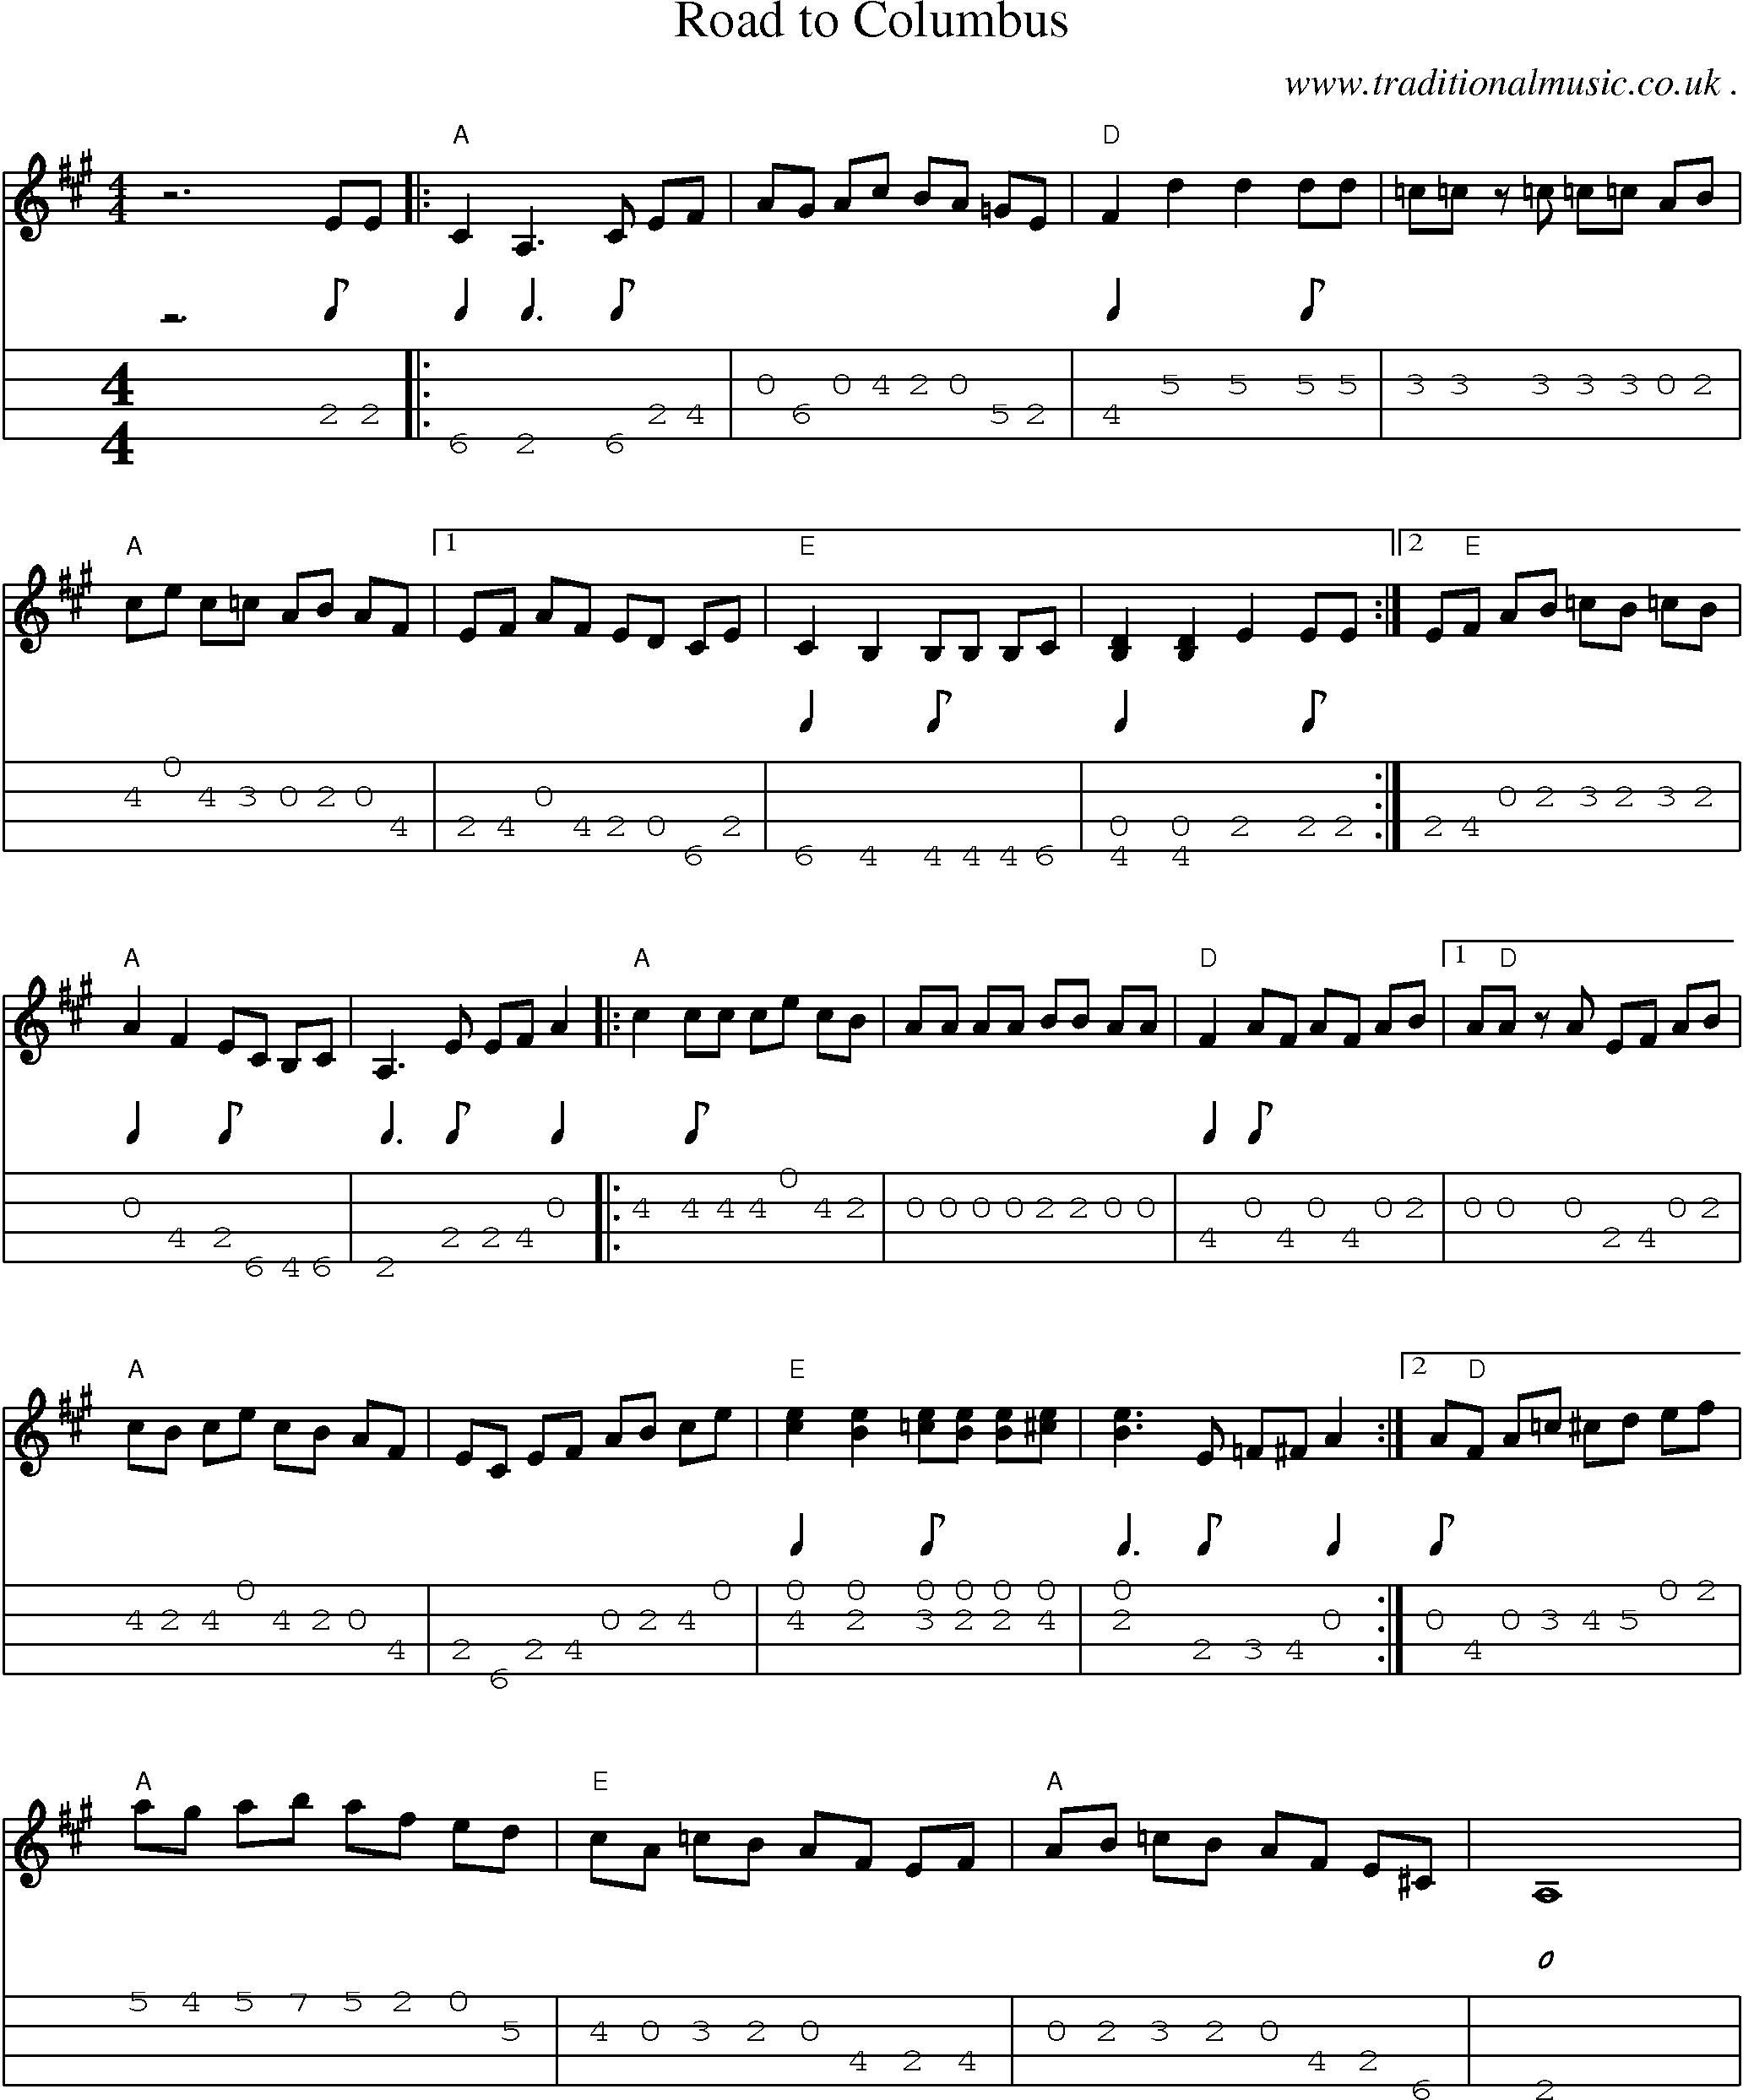 American Old Time Music Scores And Tabs For Mandolin Road To